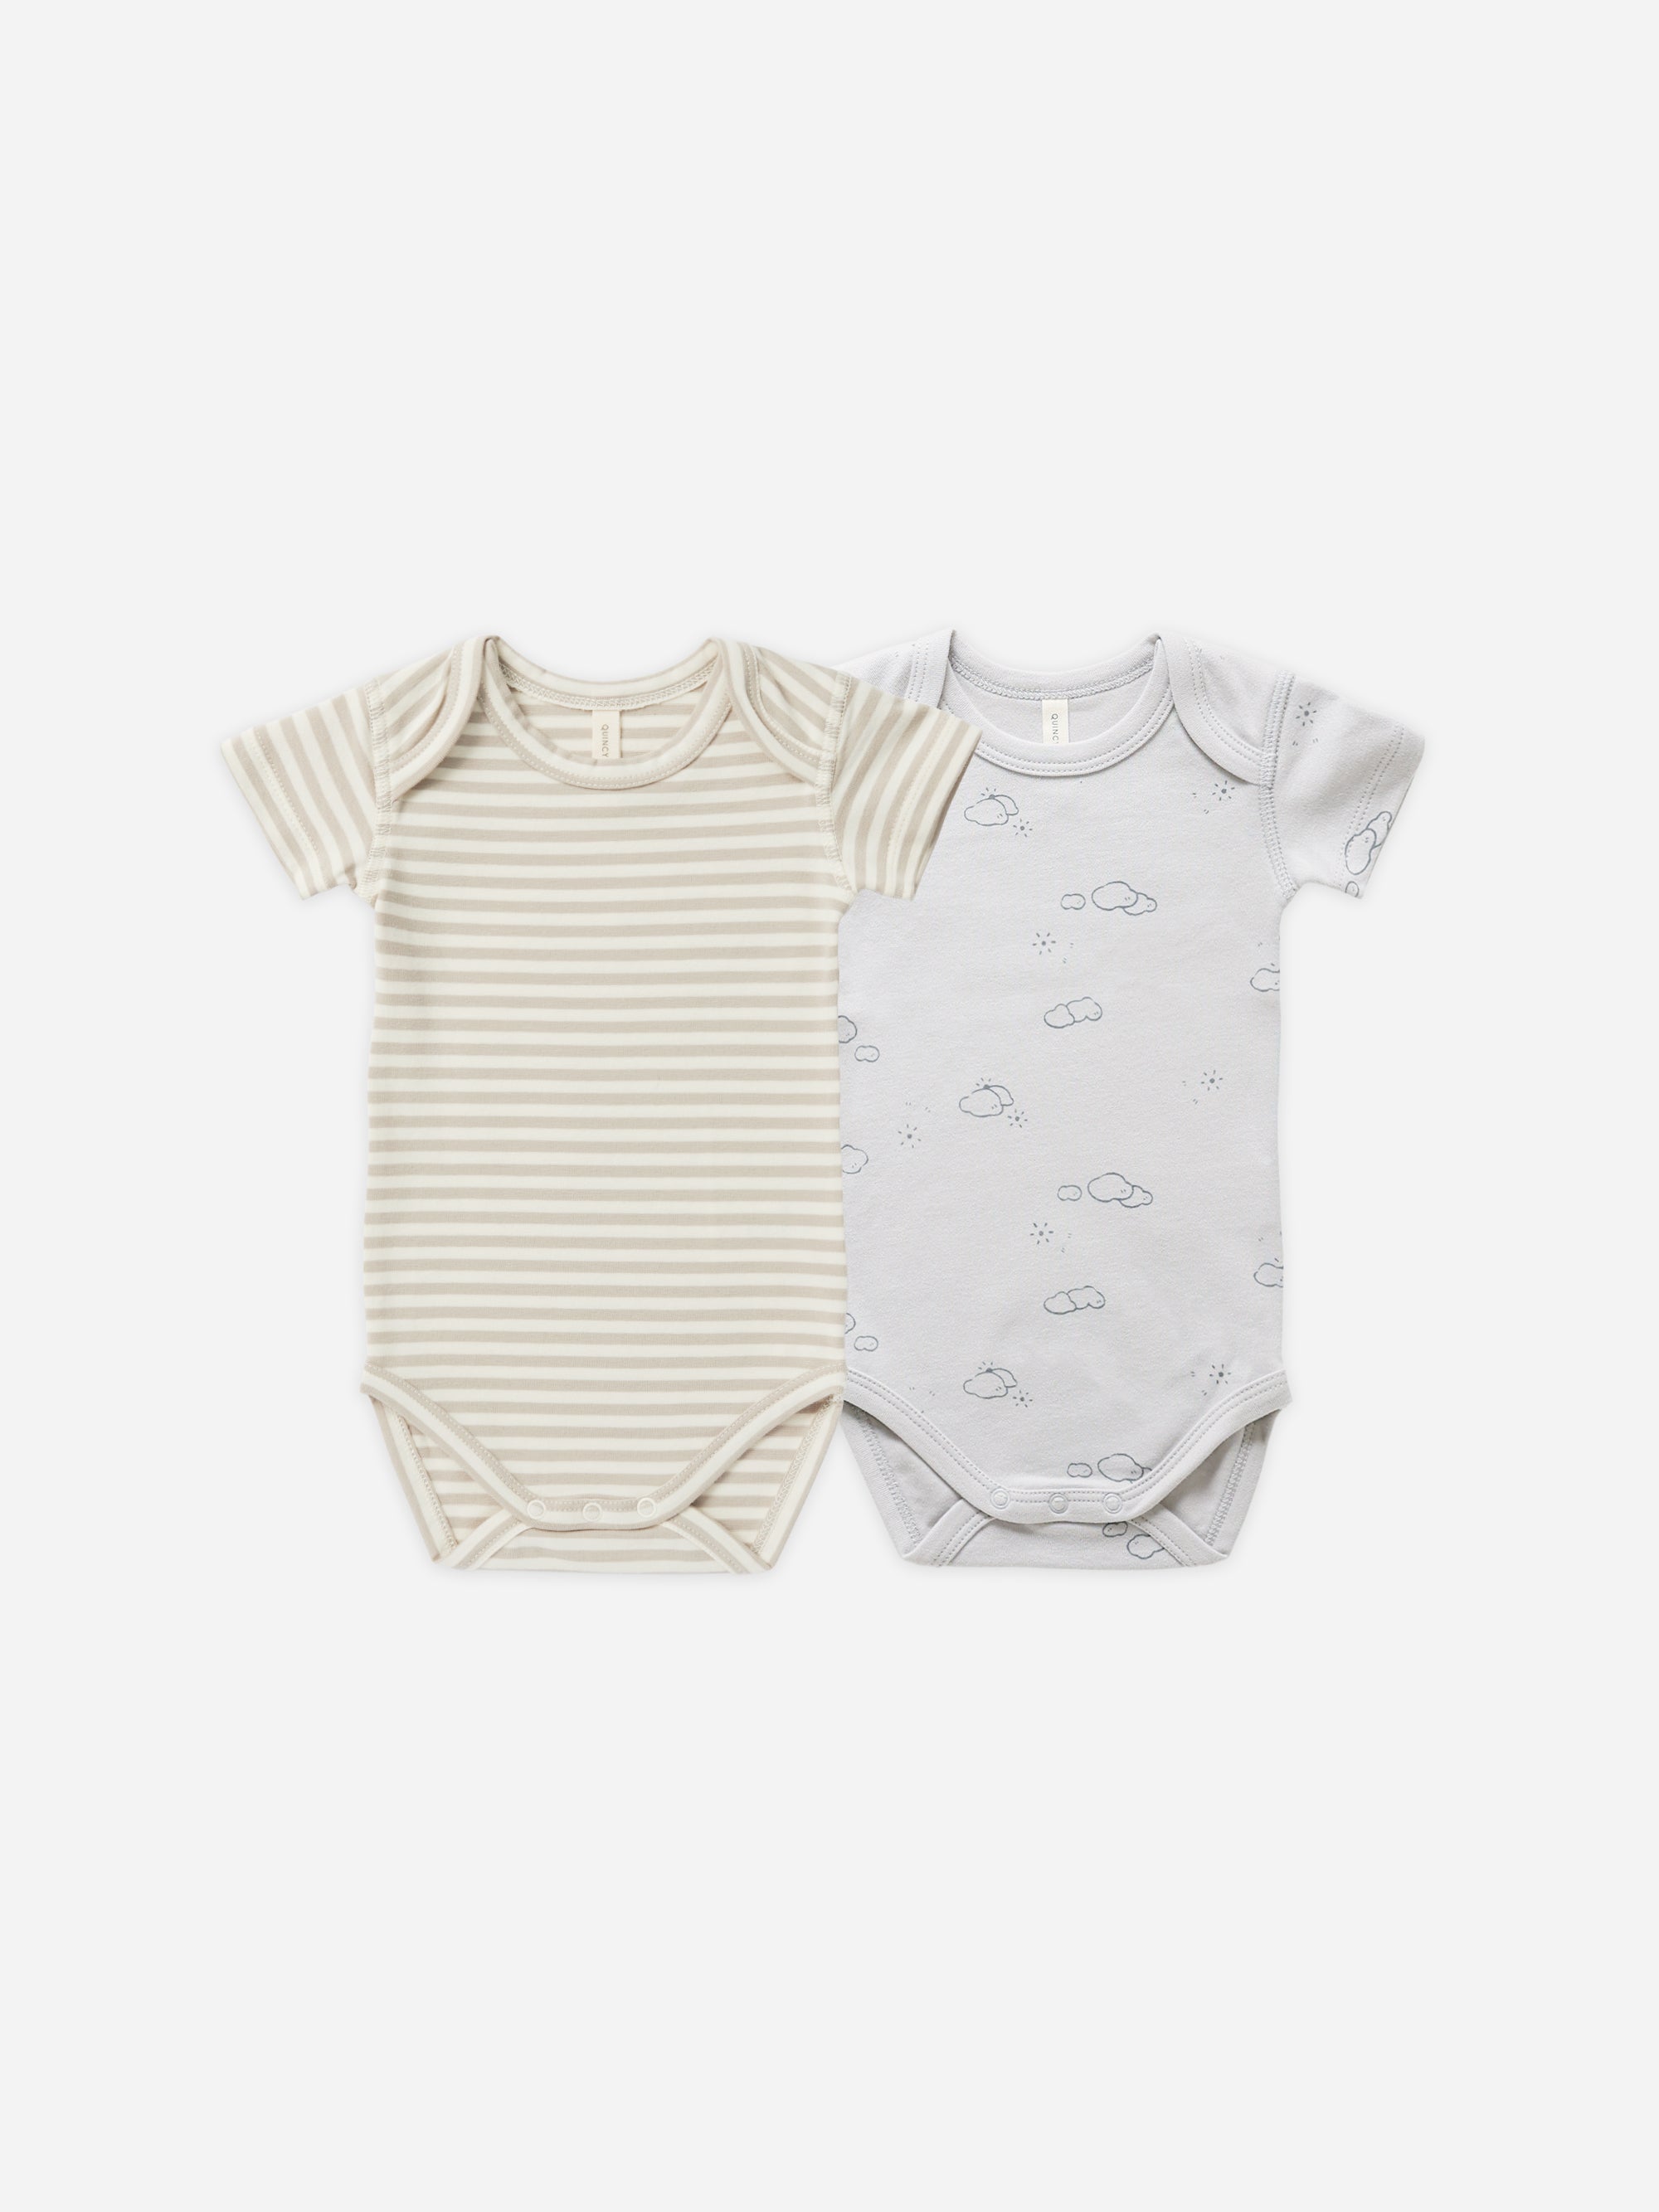 Short Sleeve Bodysuit, 2 Pack || Ash Stripe, Sunny Days - Rylee + Cru | Kids Clothes | Trendy Baby Clothes | Modern Infant Outfits |